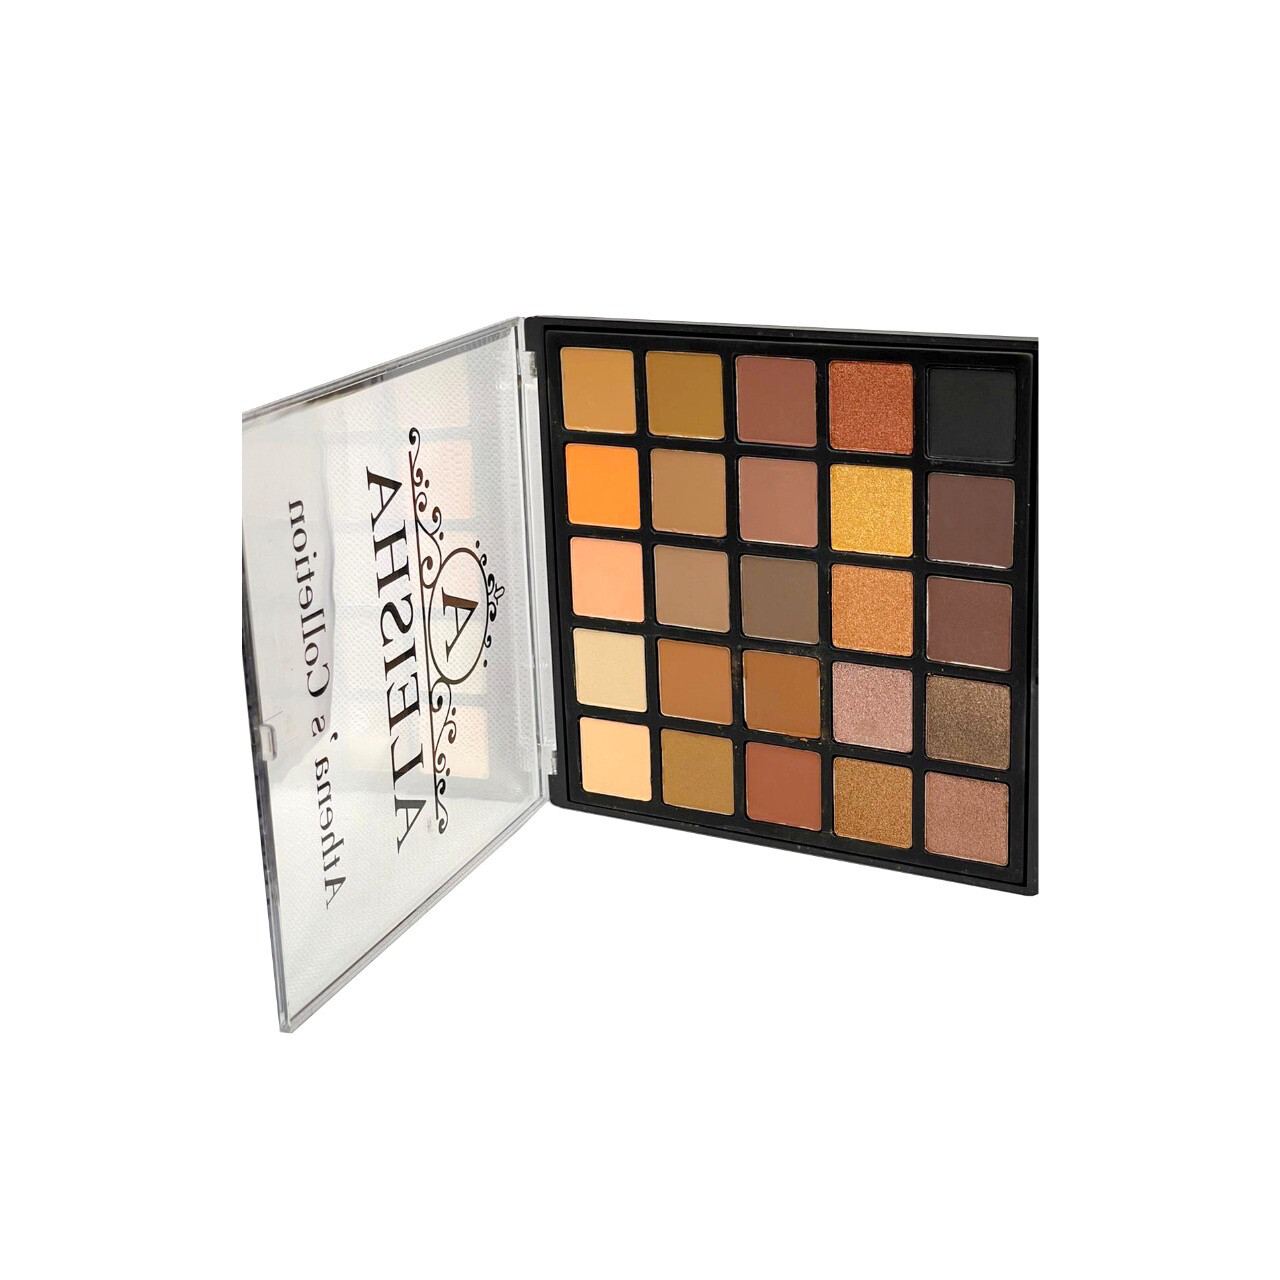 Athena's Collection Palette